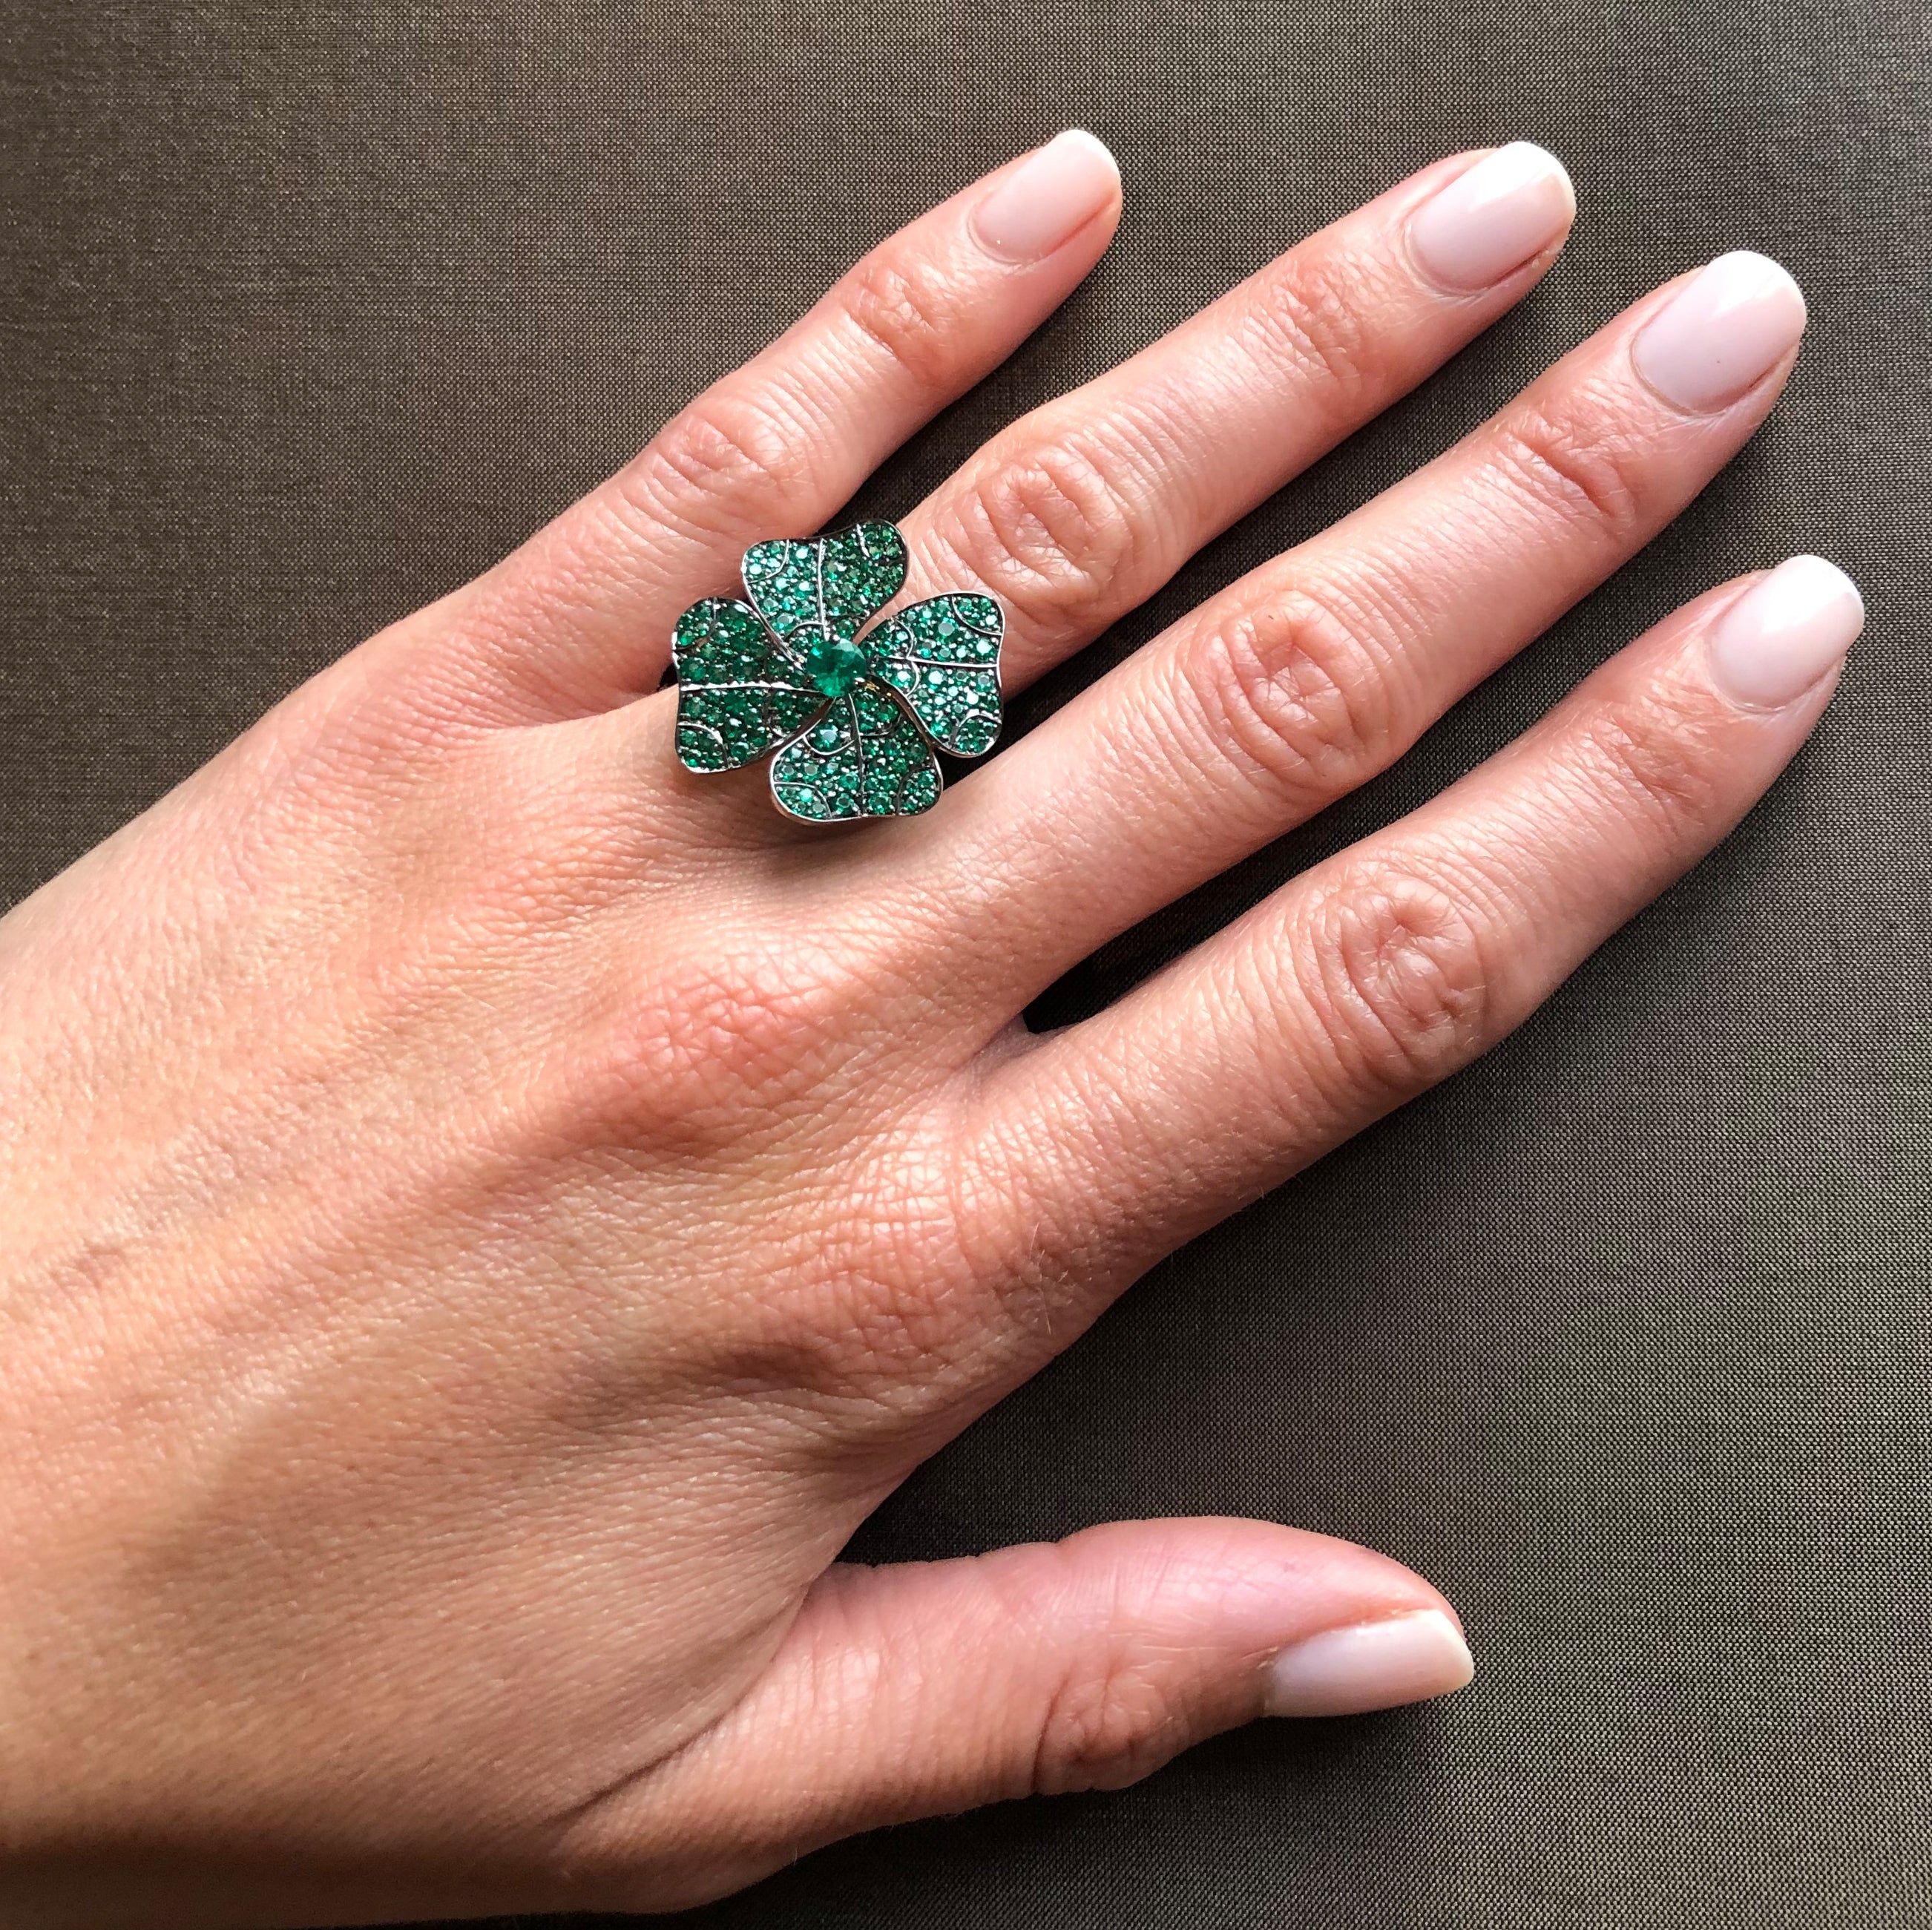 Ring White Gold with Emeralds and White Diamonds